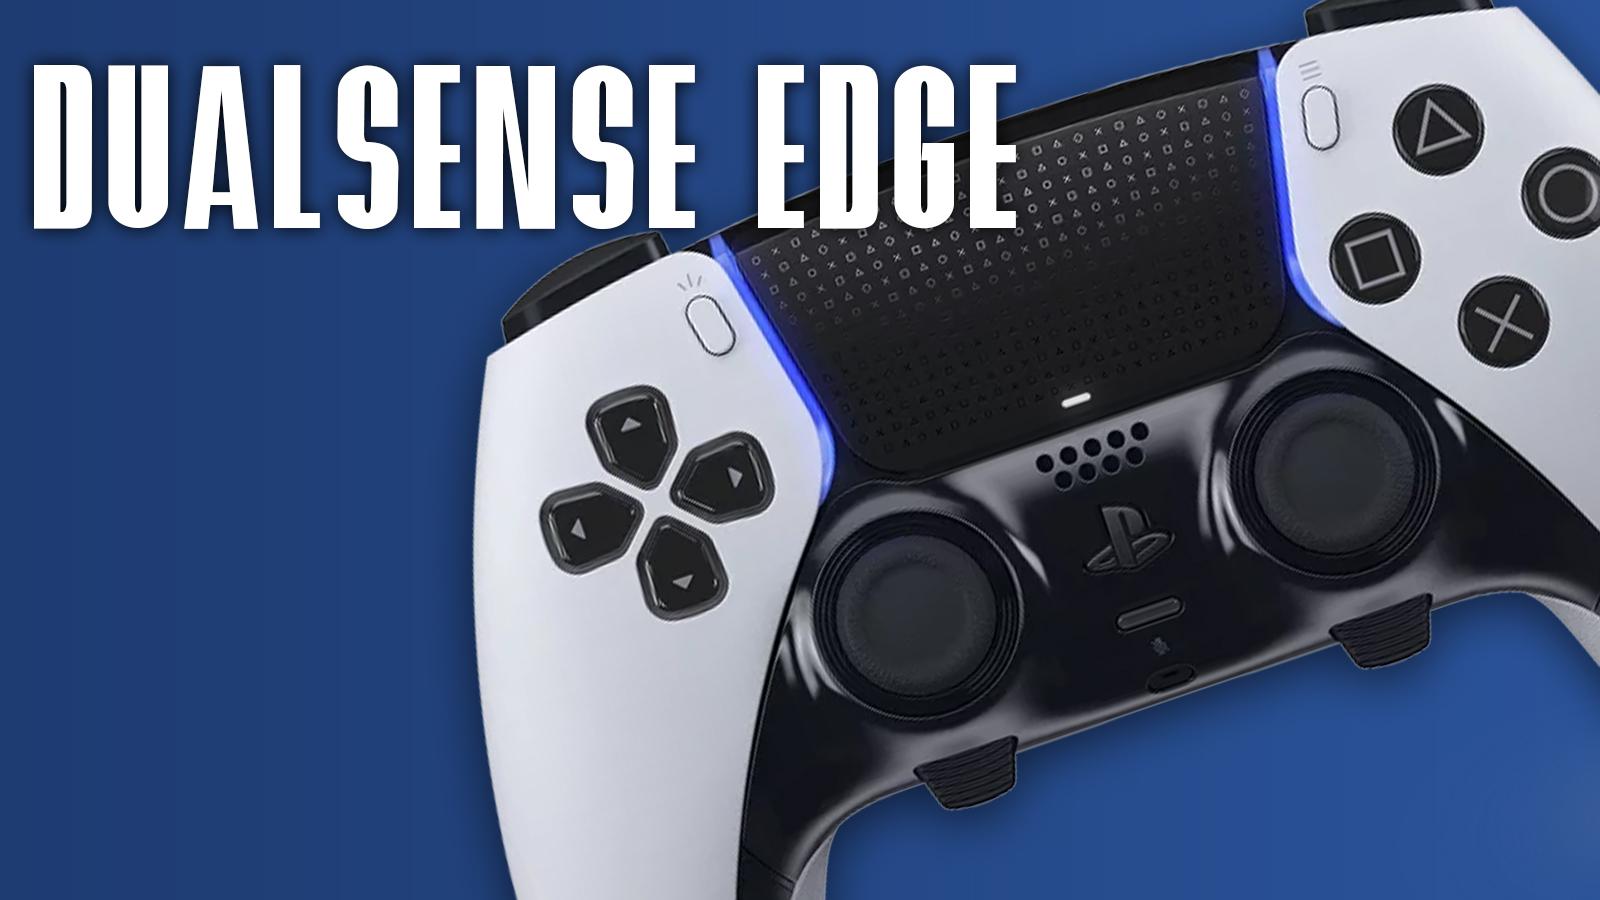 PS5 DualSense Edge controller price and release date revealed